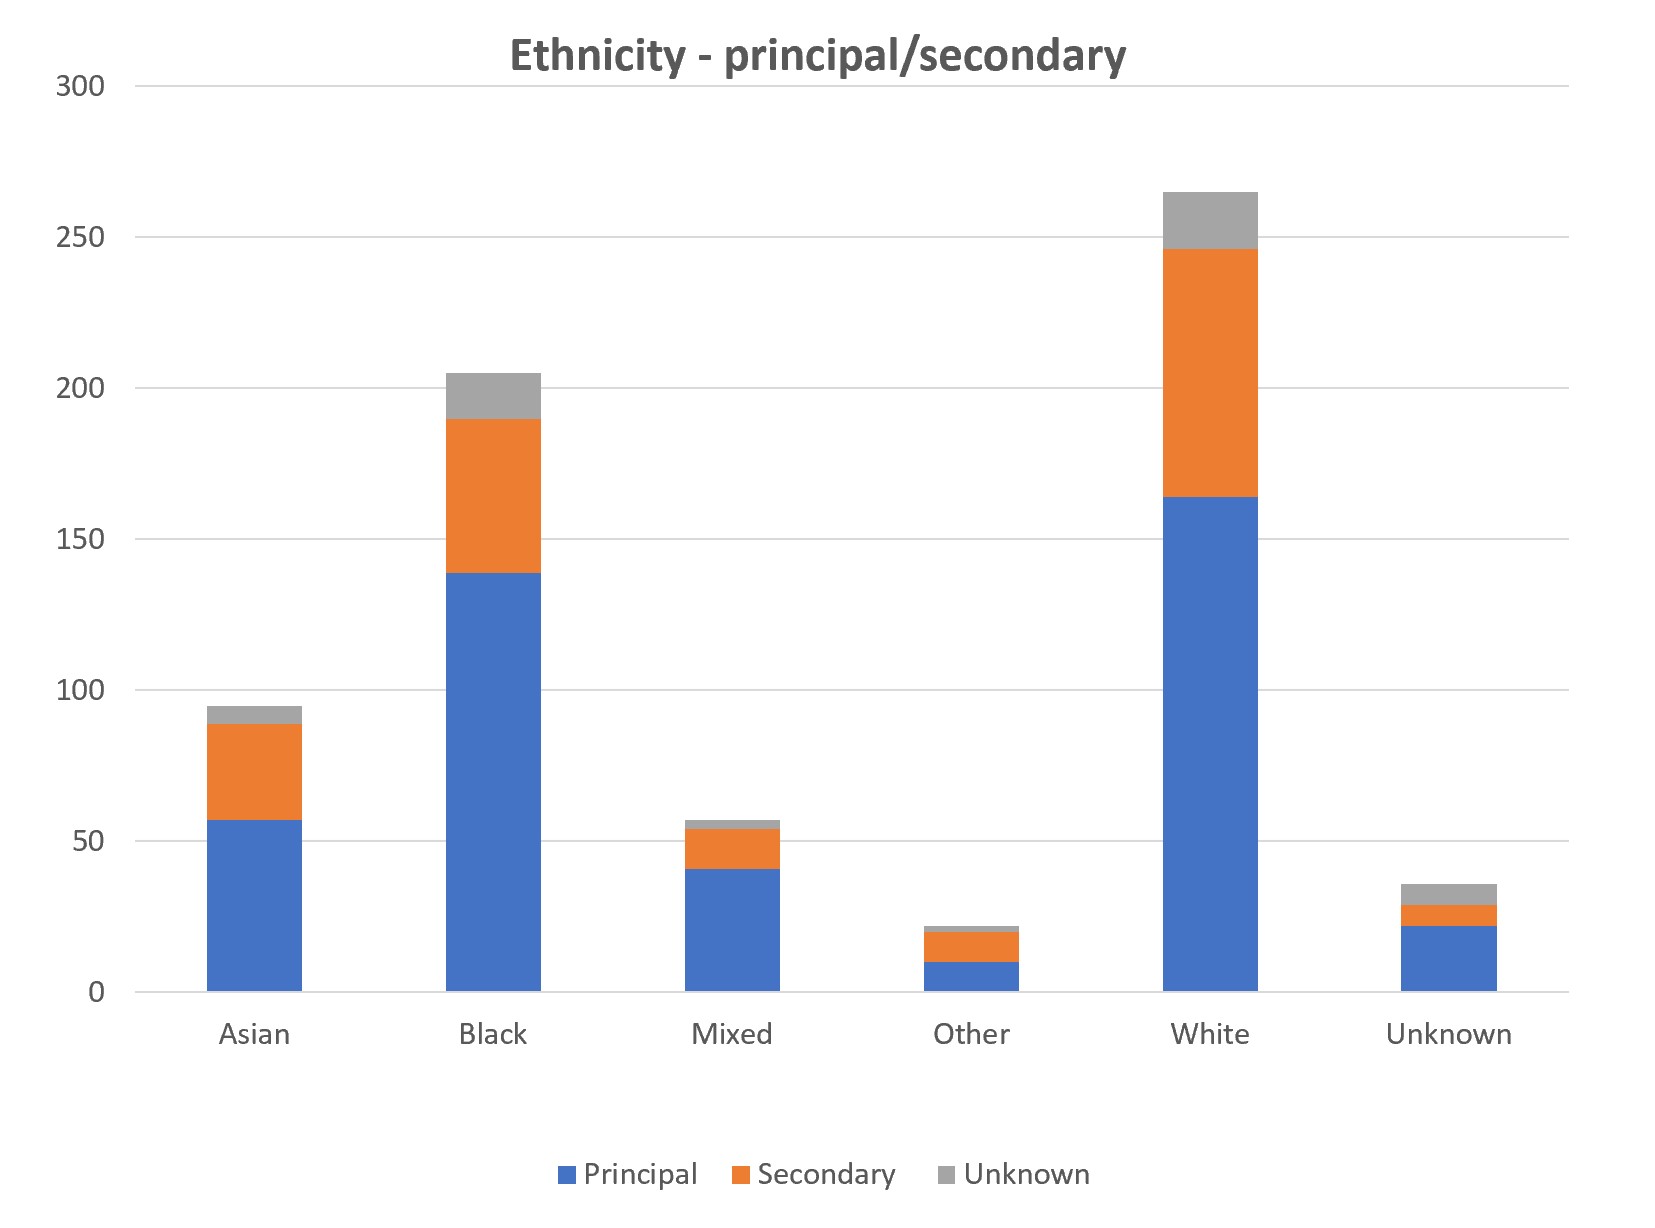 Graph showing the ethnicity of defendants and whether they are principal or secondary defendants in the analysis. The data for this graph are available in the spreadsheets published on this page.